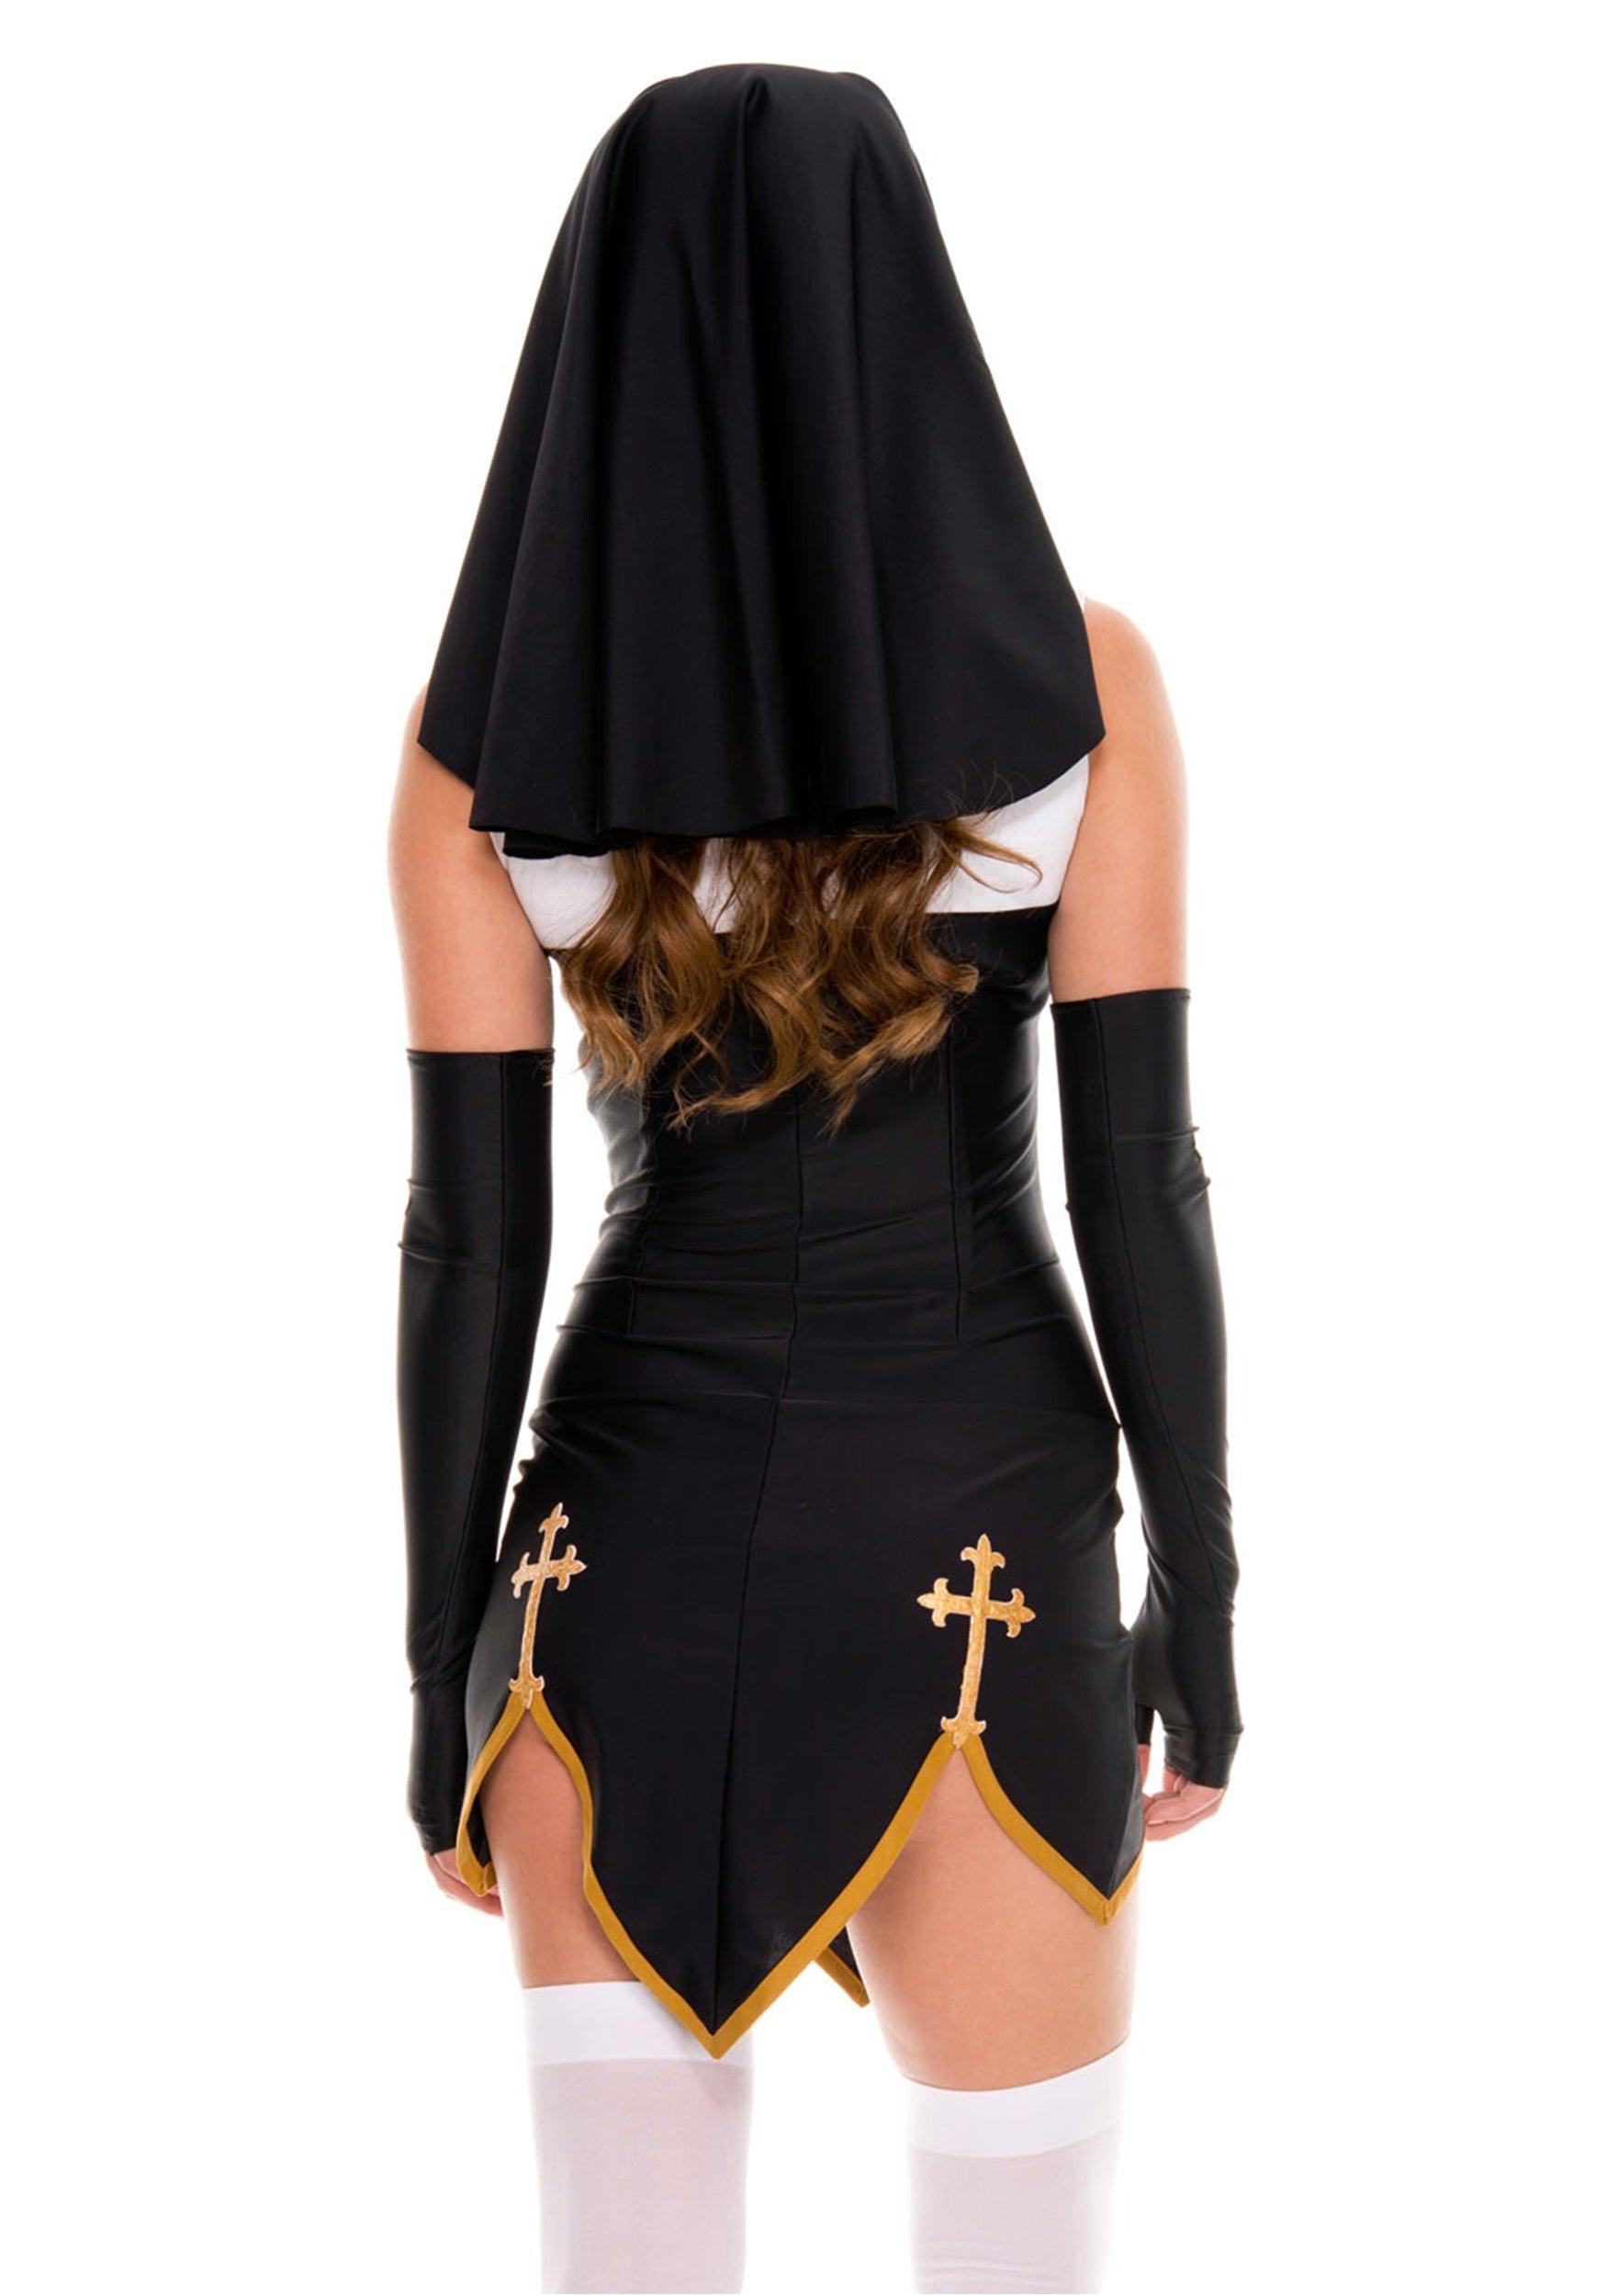 Sexy Nunn Cosplay Halloween Costume - Mint Leafe Boutique 